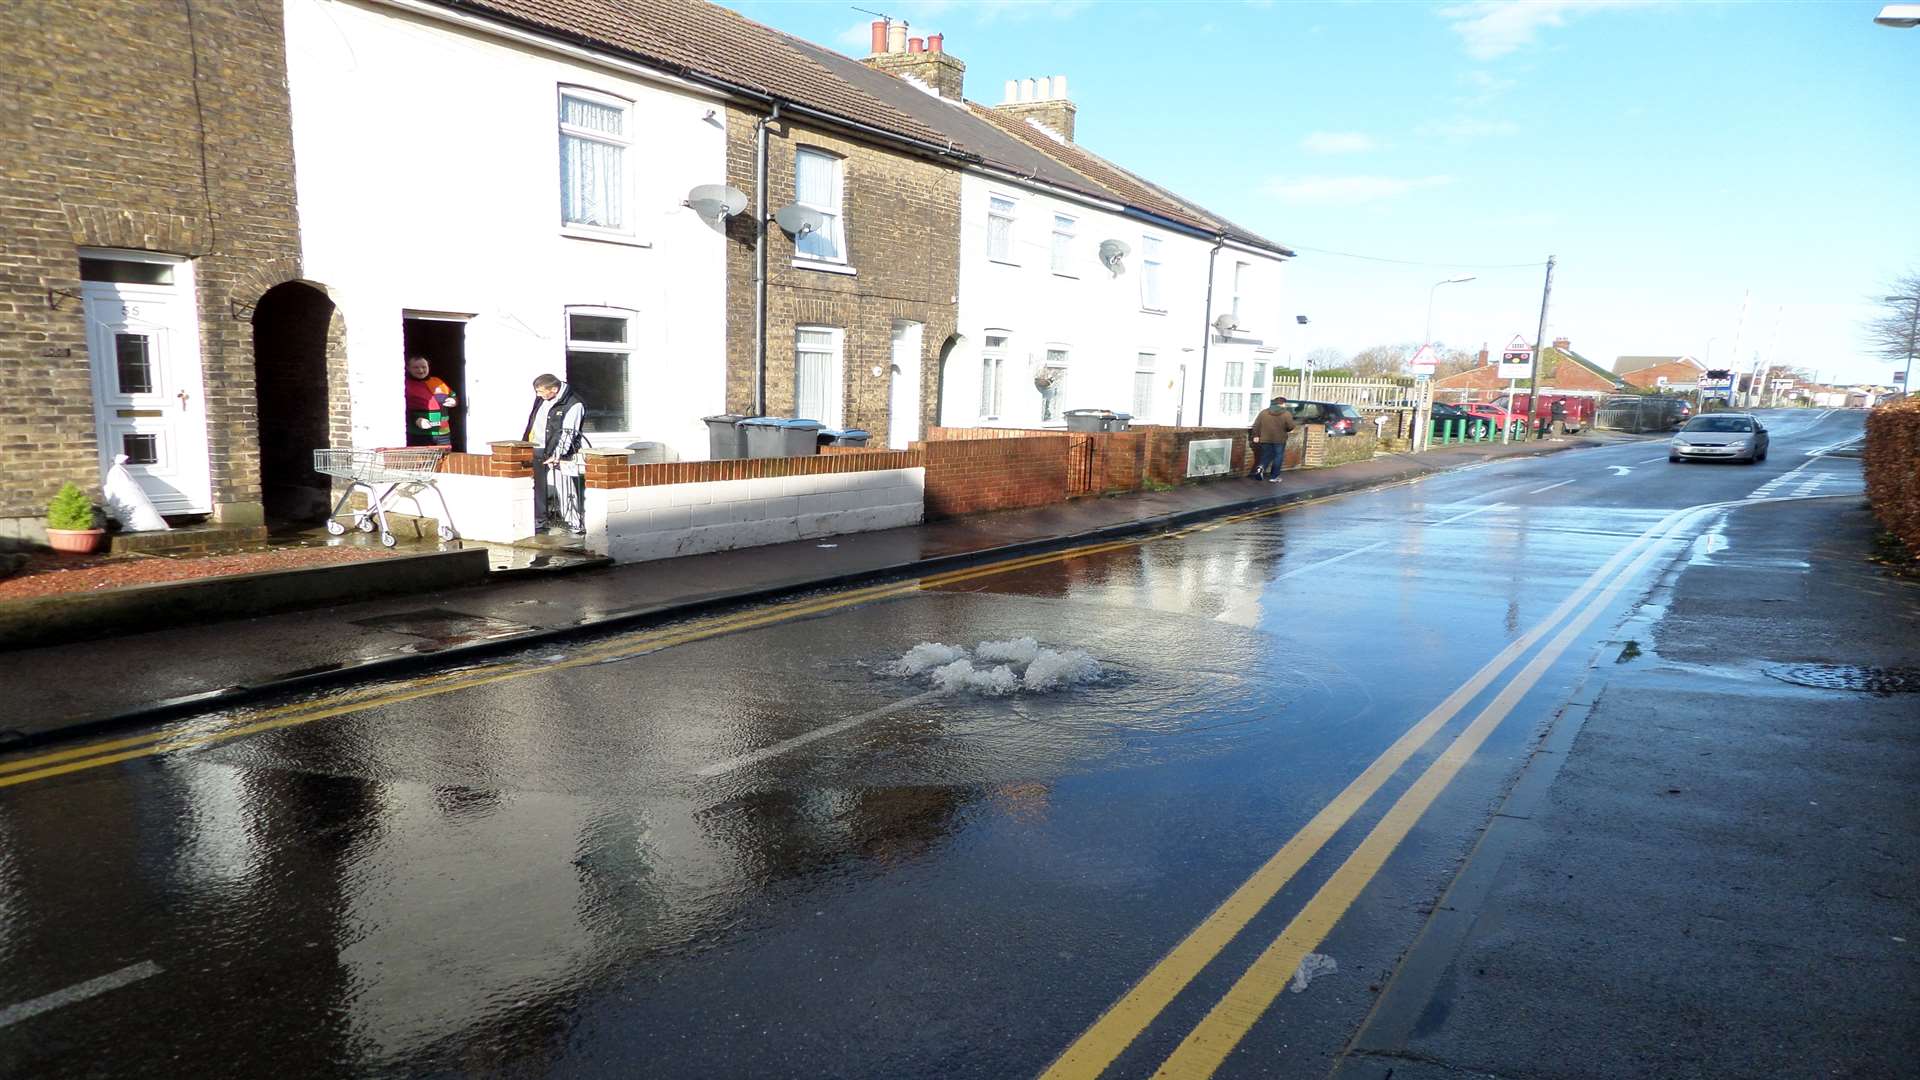 Albert Road has been subject to flooding for years. Picture: Martin Tapsall